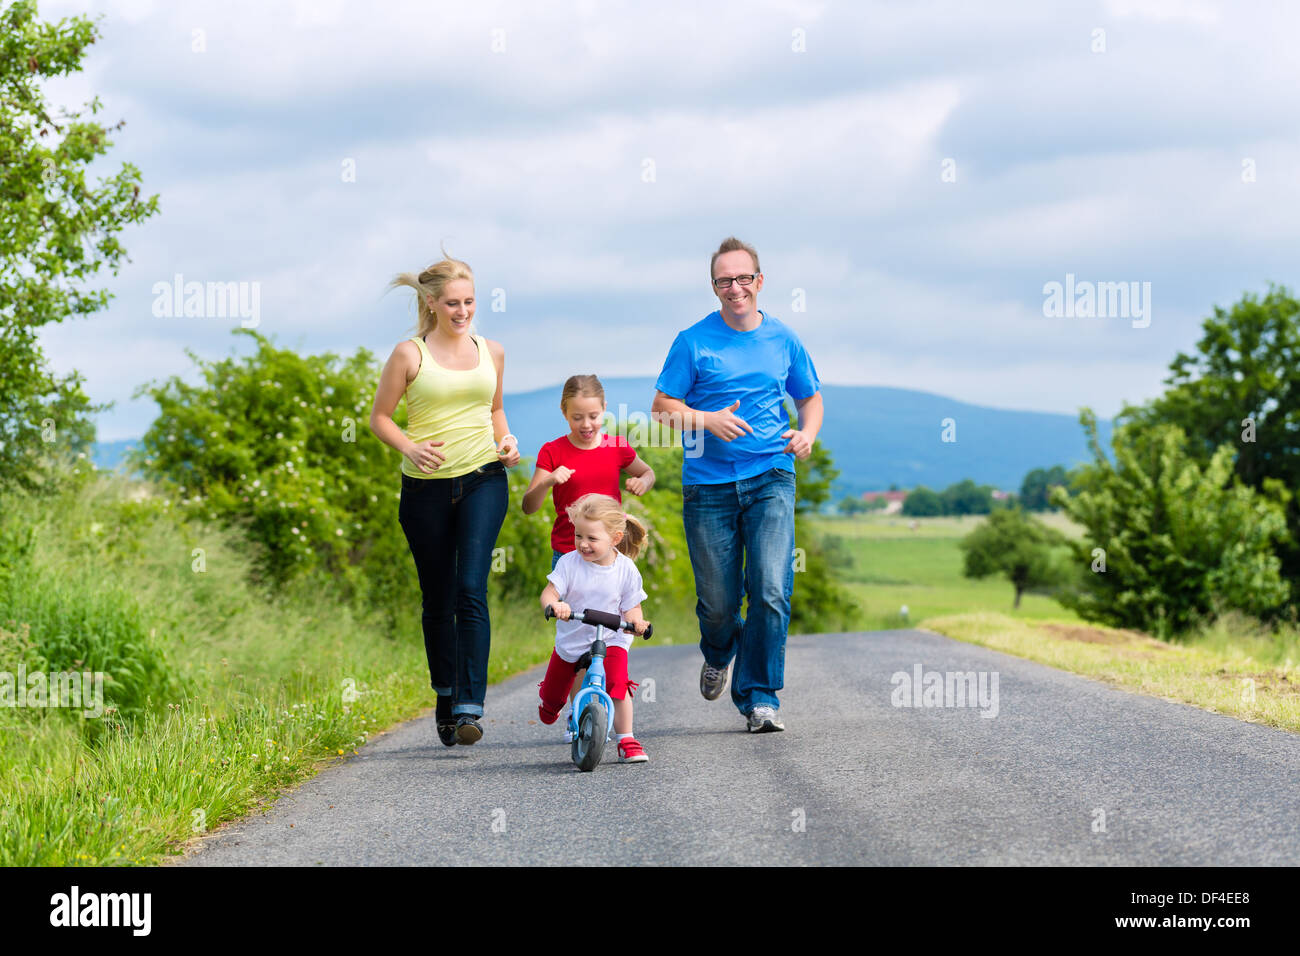 Family of Little girl father and mother or mom and dad running on street in rural environment for sport Stock Photo